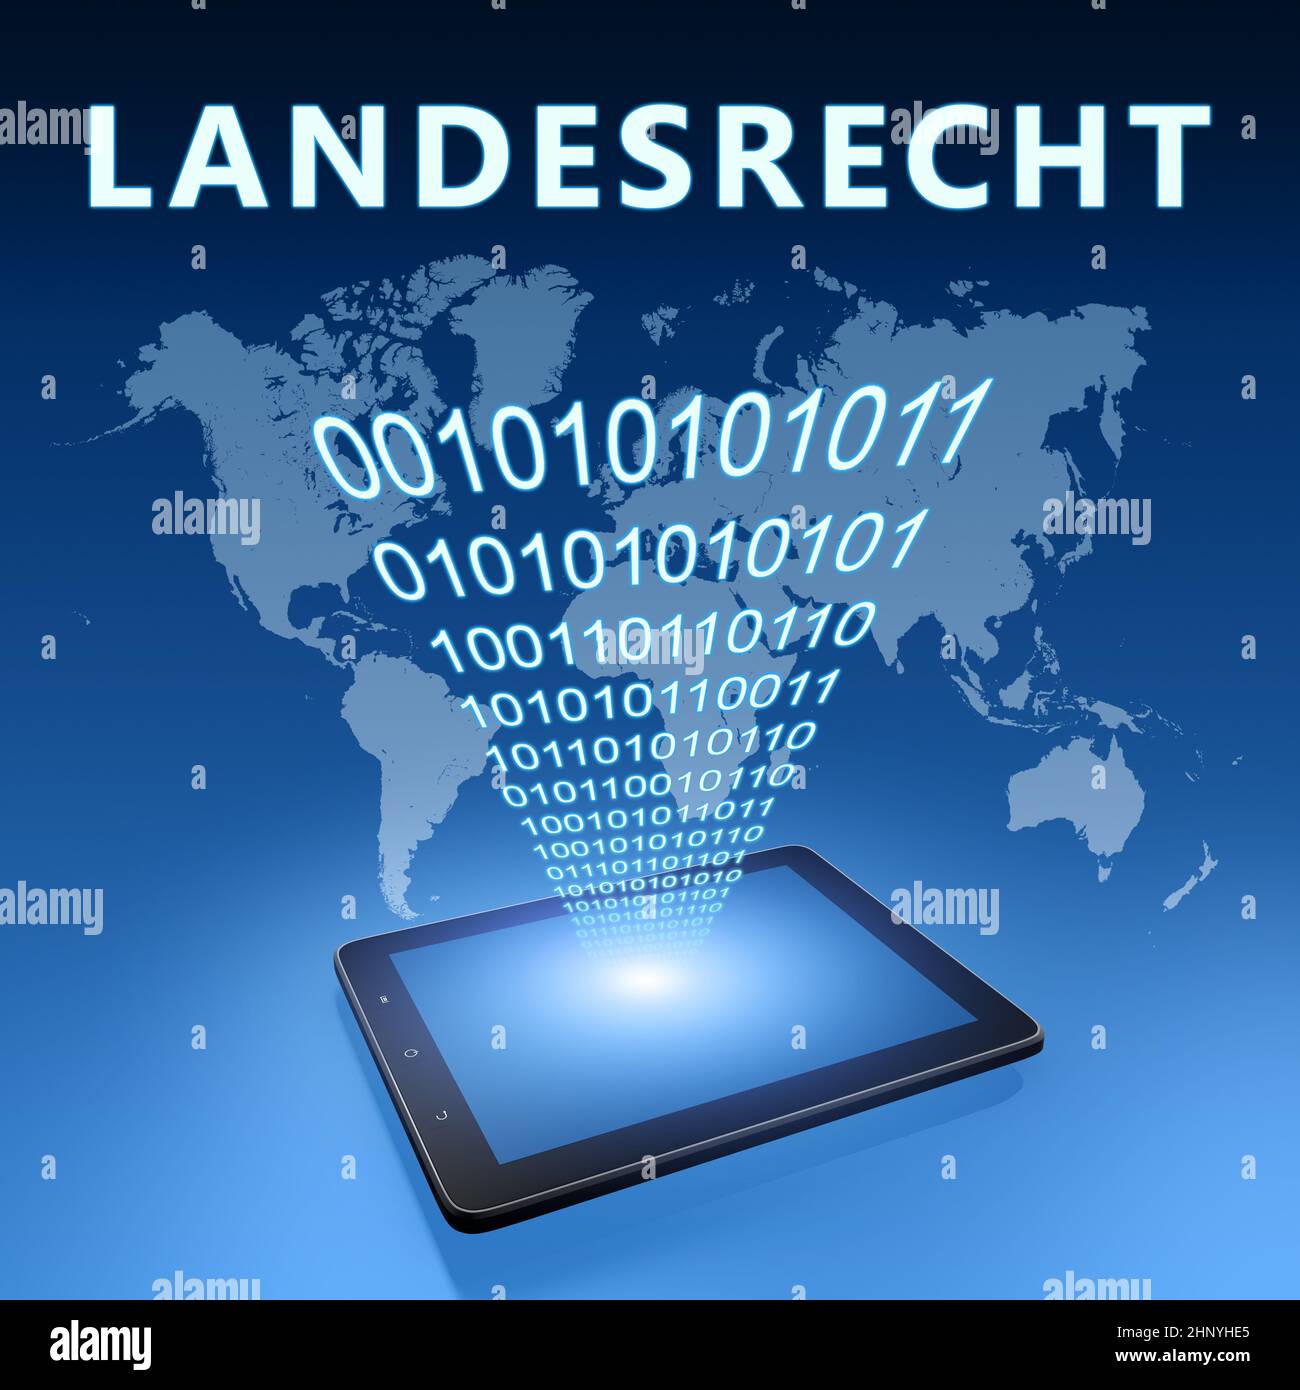 Landesrecht - german word for national law oder state law - text concept with tablet computer on blue wolrd map background - 3d render illustration. Stock Photo